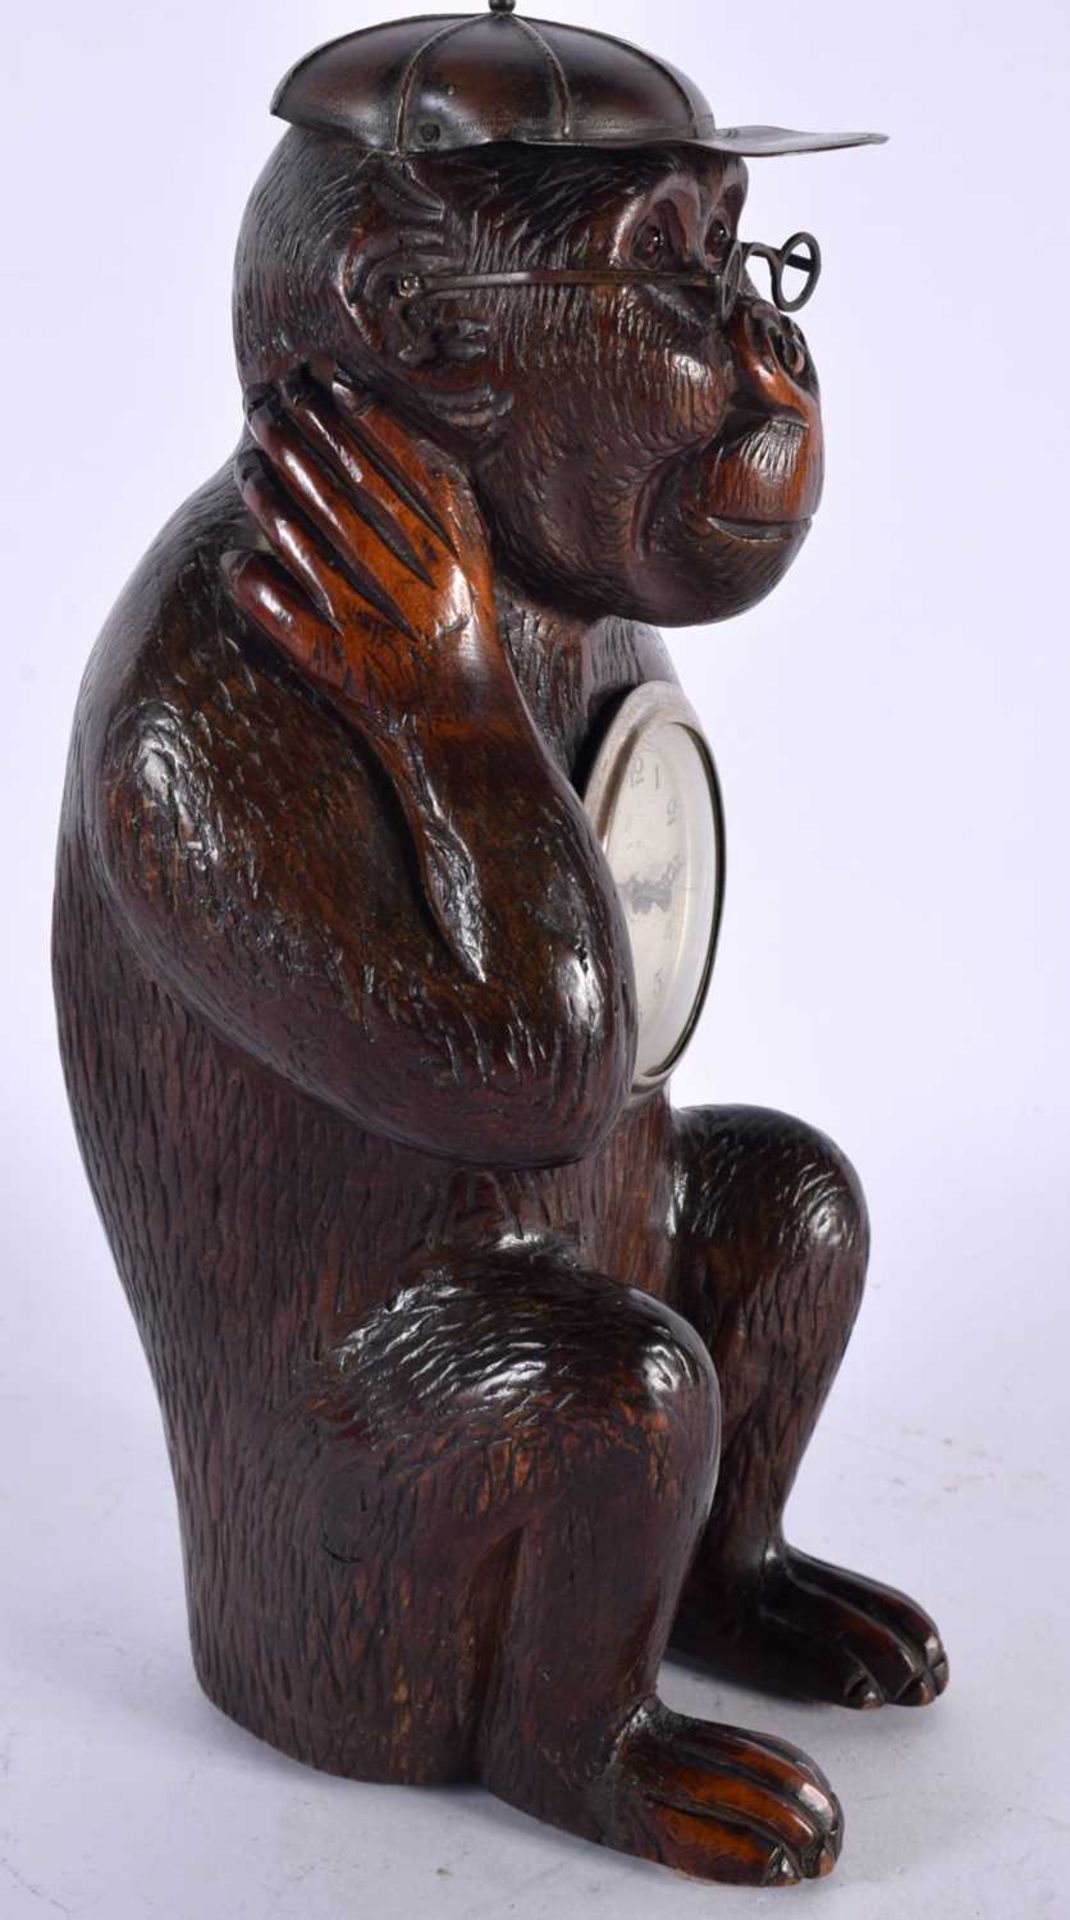 AN UNUSUAL LATE 19TH CENTURY BAVARIAN BLACK FOREST CARVED LINDEN WOOD CLOCK formed as a seated - Image 2 of 4